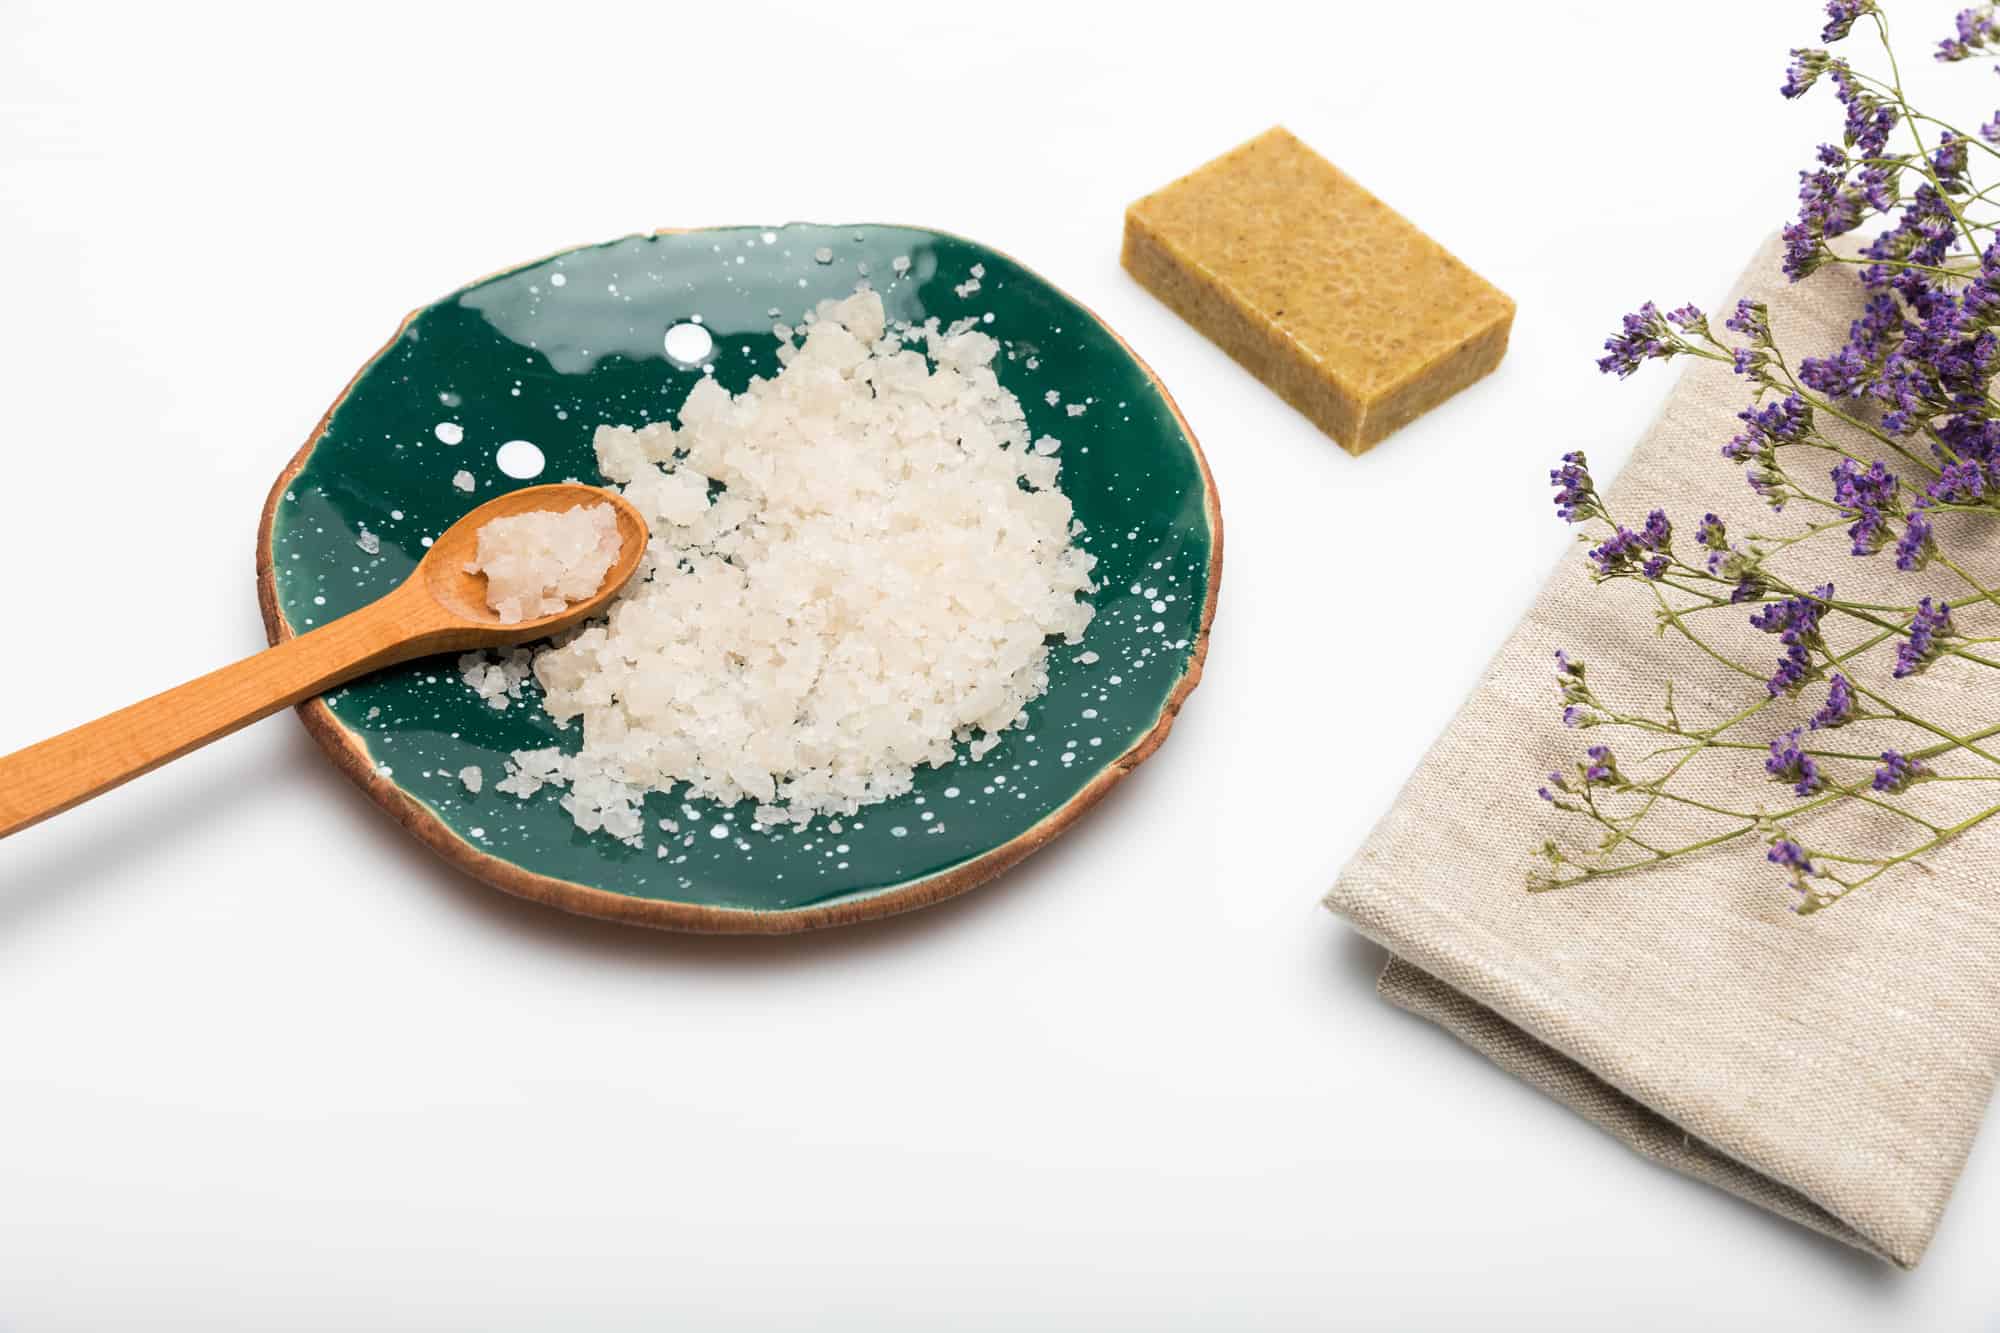 Coarse salt on a small plate with a wooden spoon next to a burlap bag of lavender for a DIY beauty treatment